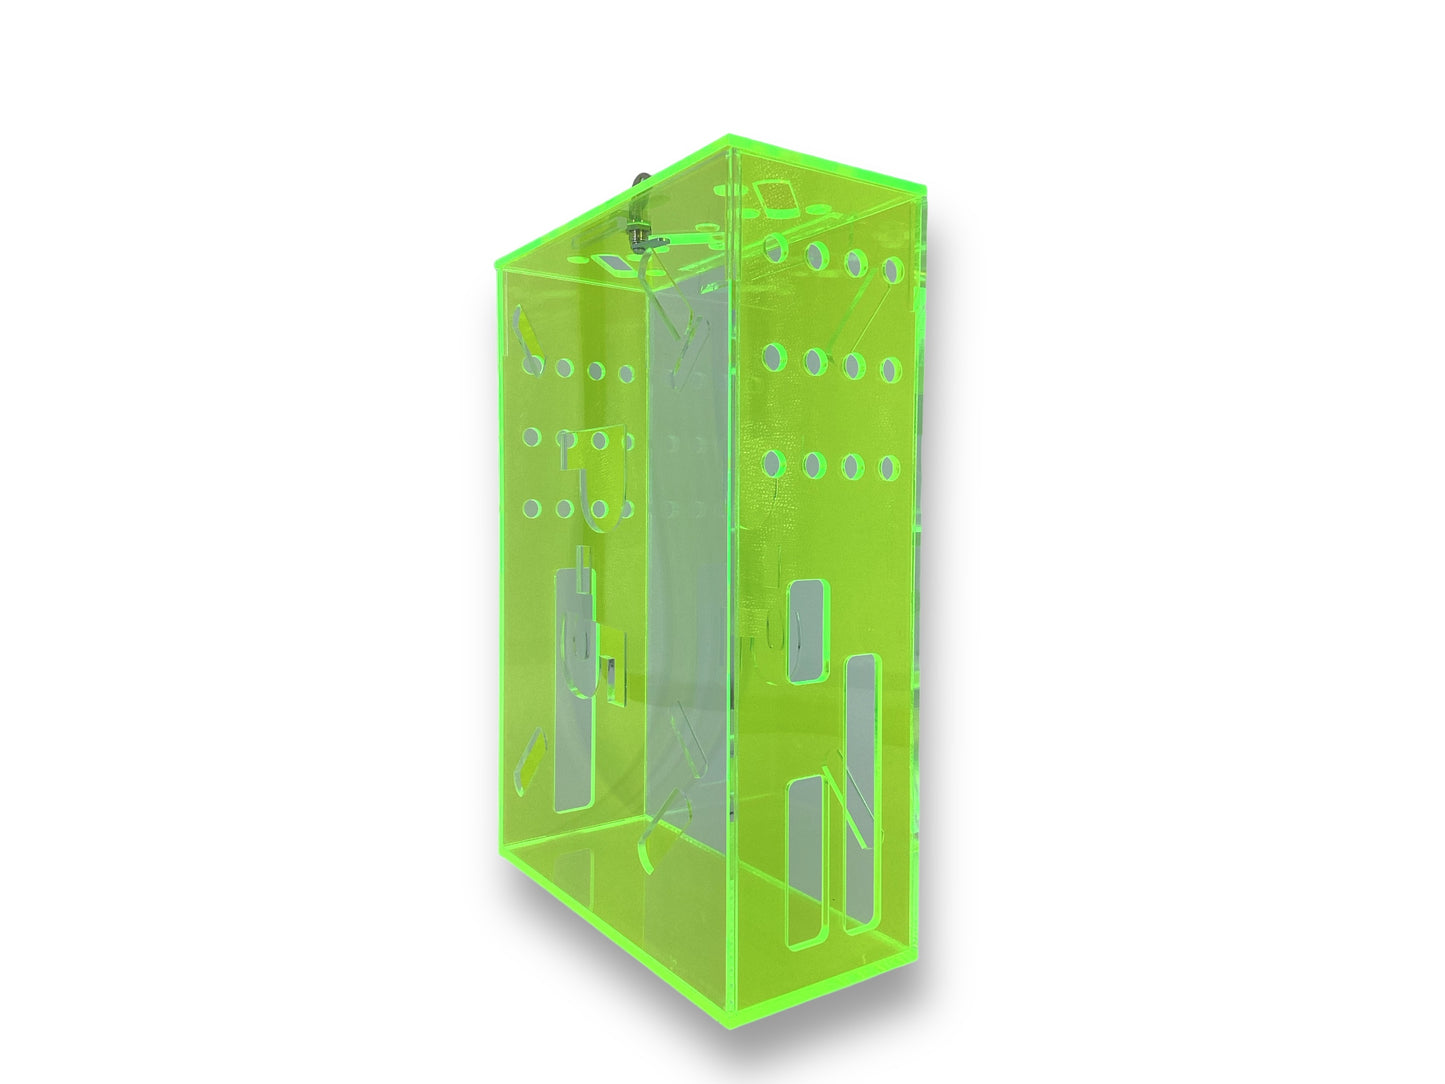 Clear and Fluorescent Green Acrylic Compatible for PlayStation 5 (PS5) Console Security Case